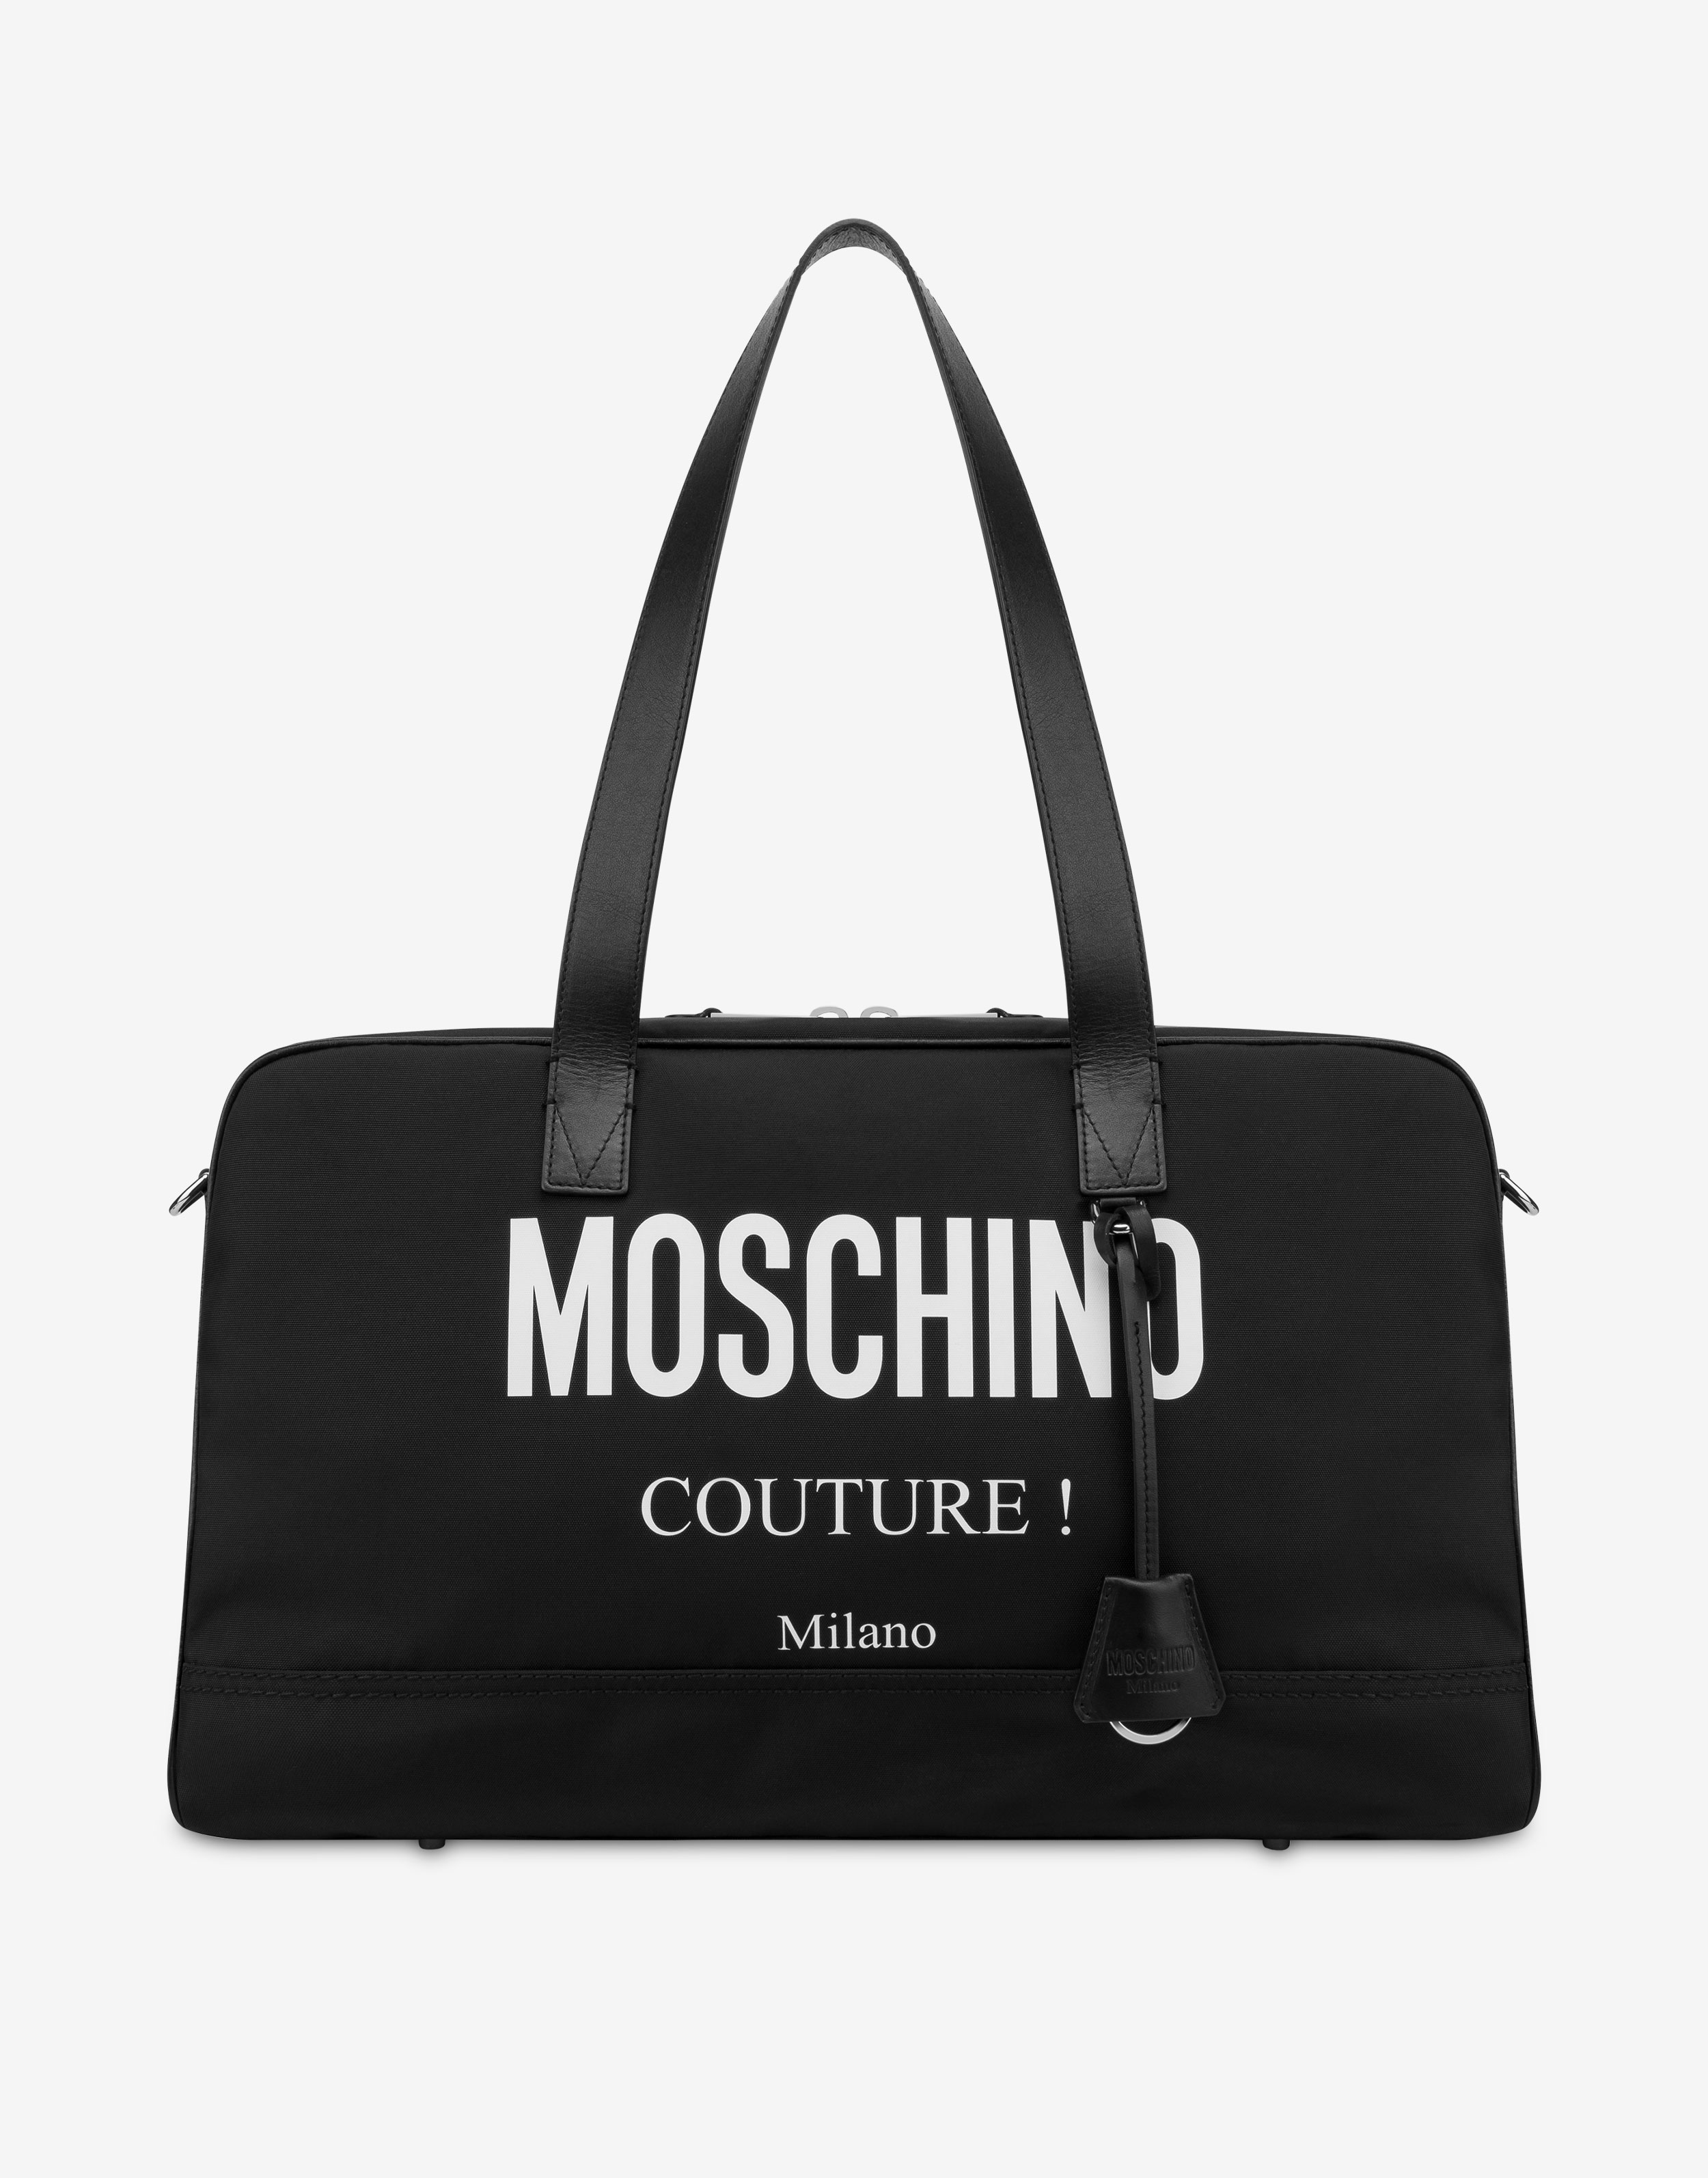 Moschino Couture ナイロン トラベルバッグ